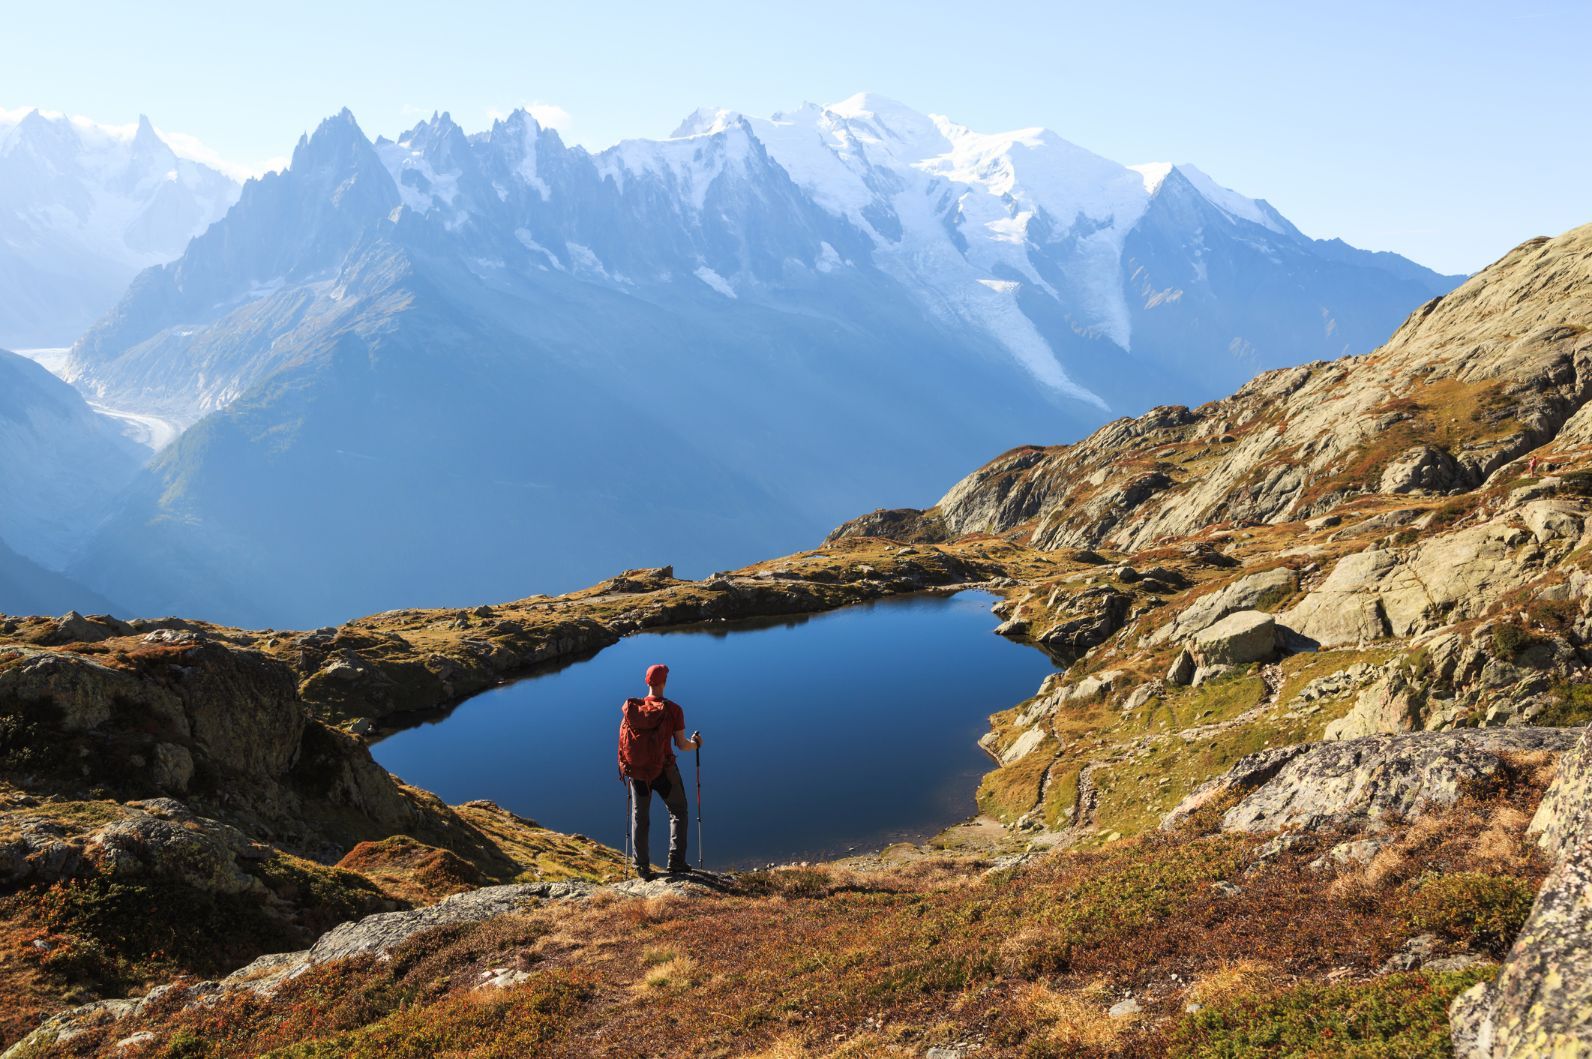 A hiker looking on at the Lac des Cheserys on the famous Tour du Mont Blanc near Chamonix, France. Photo: Getty